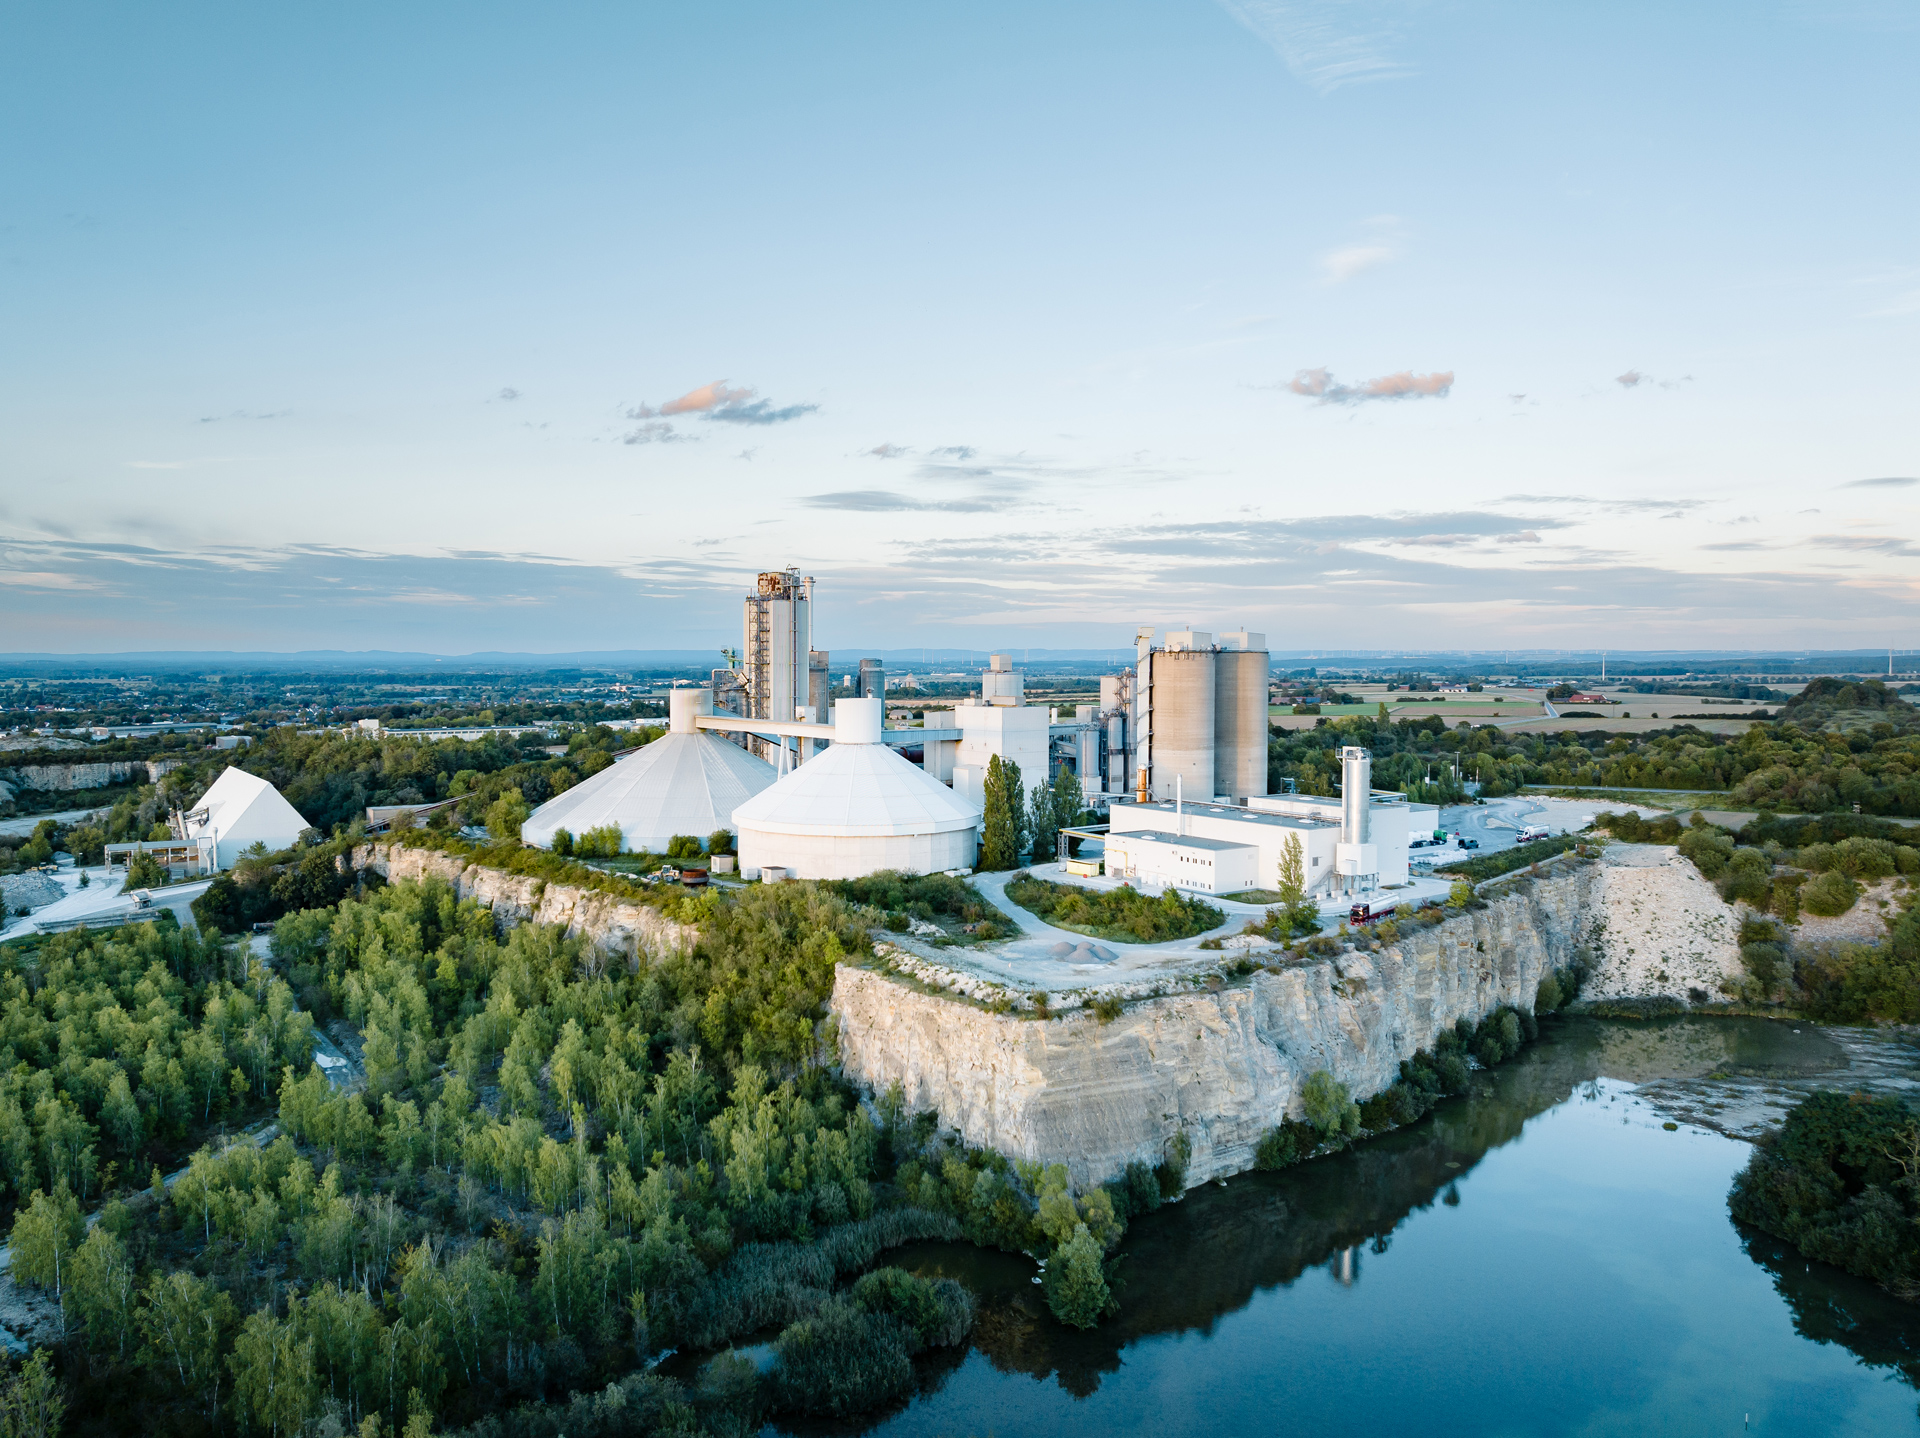 Cement works in a green landscape, water in front of it